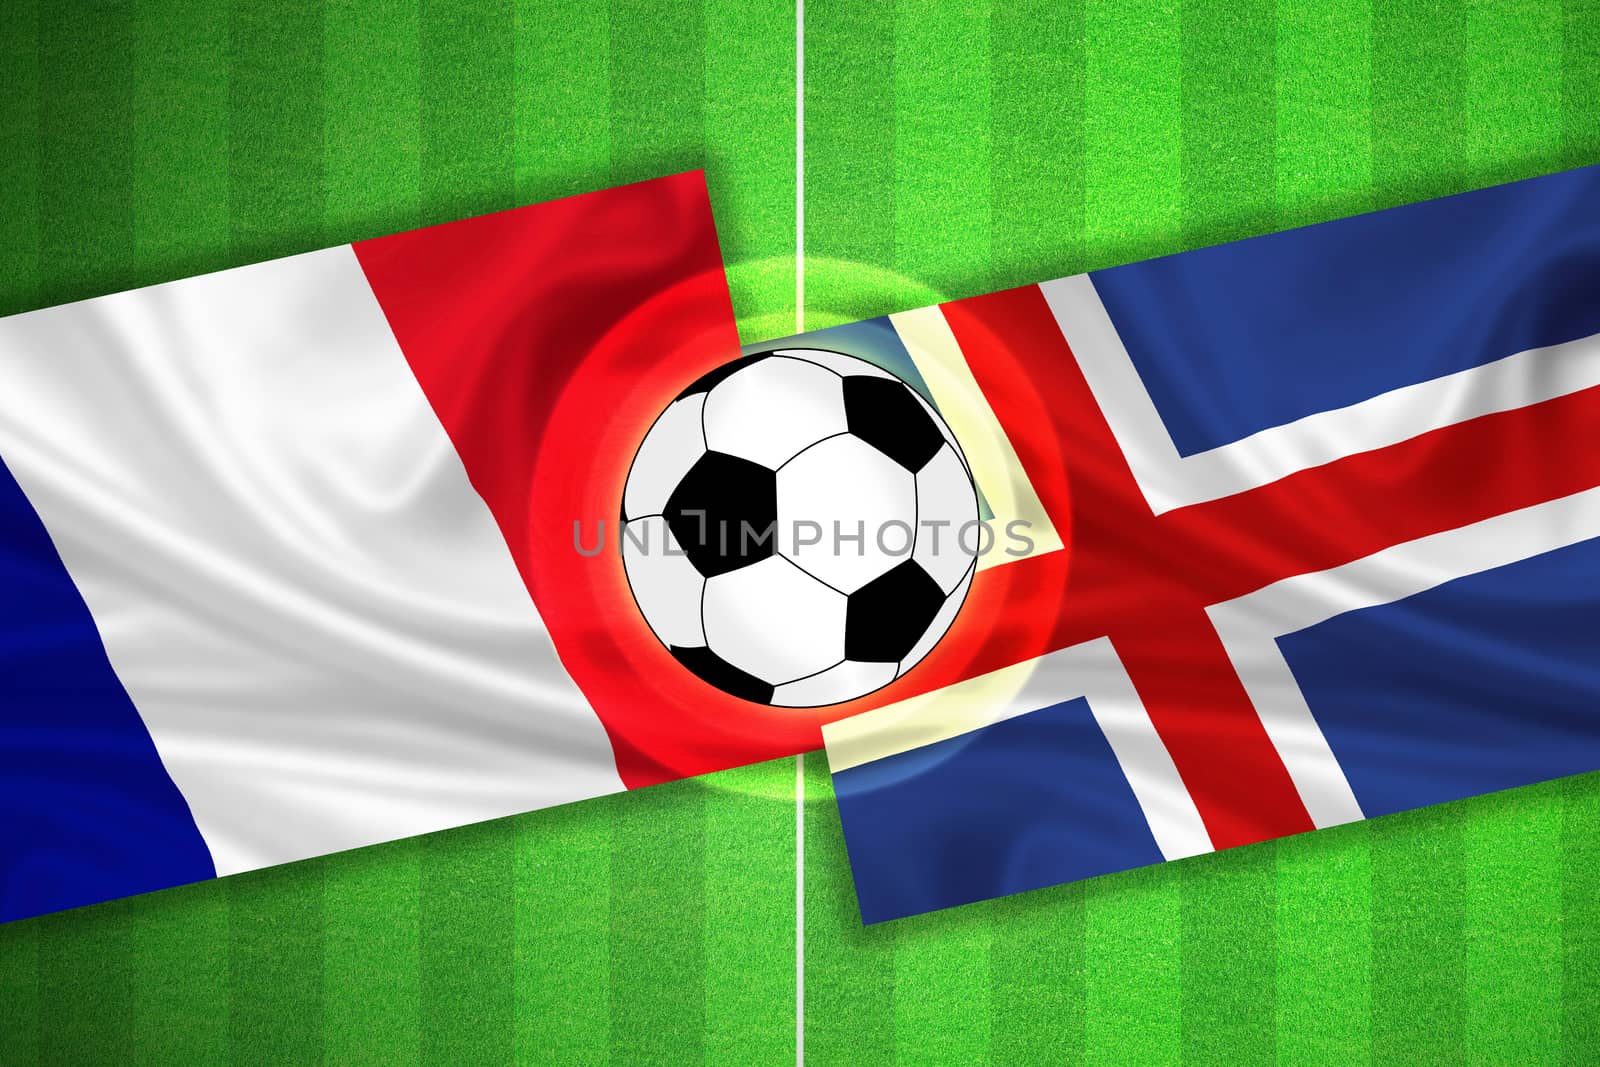 green Soccer / Football field with stripes and flags of france - iceland, and ball.